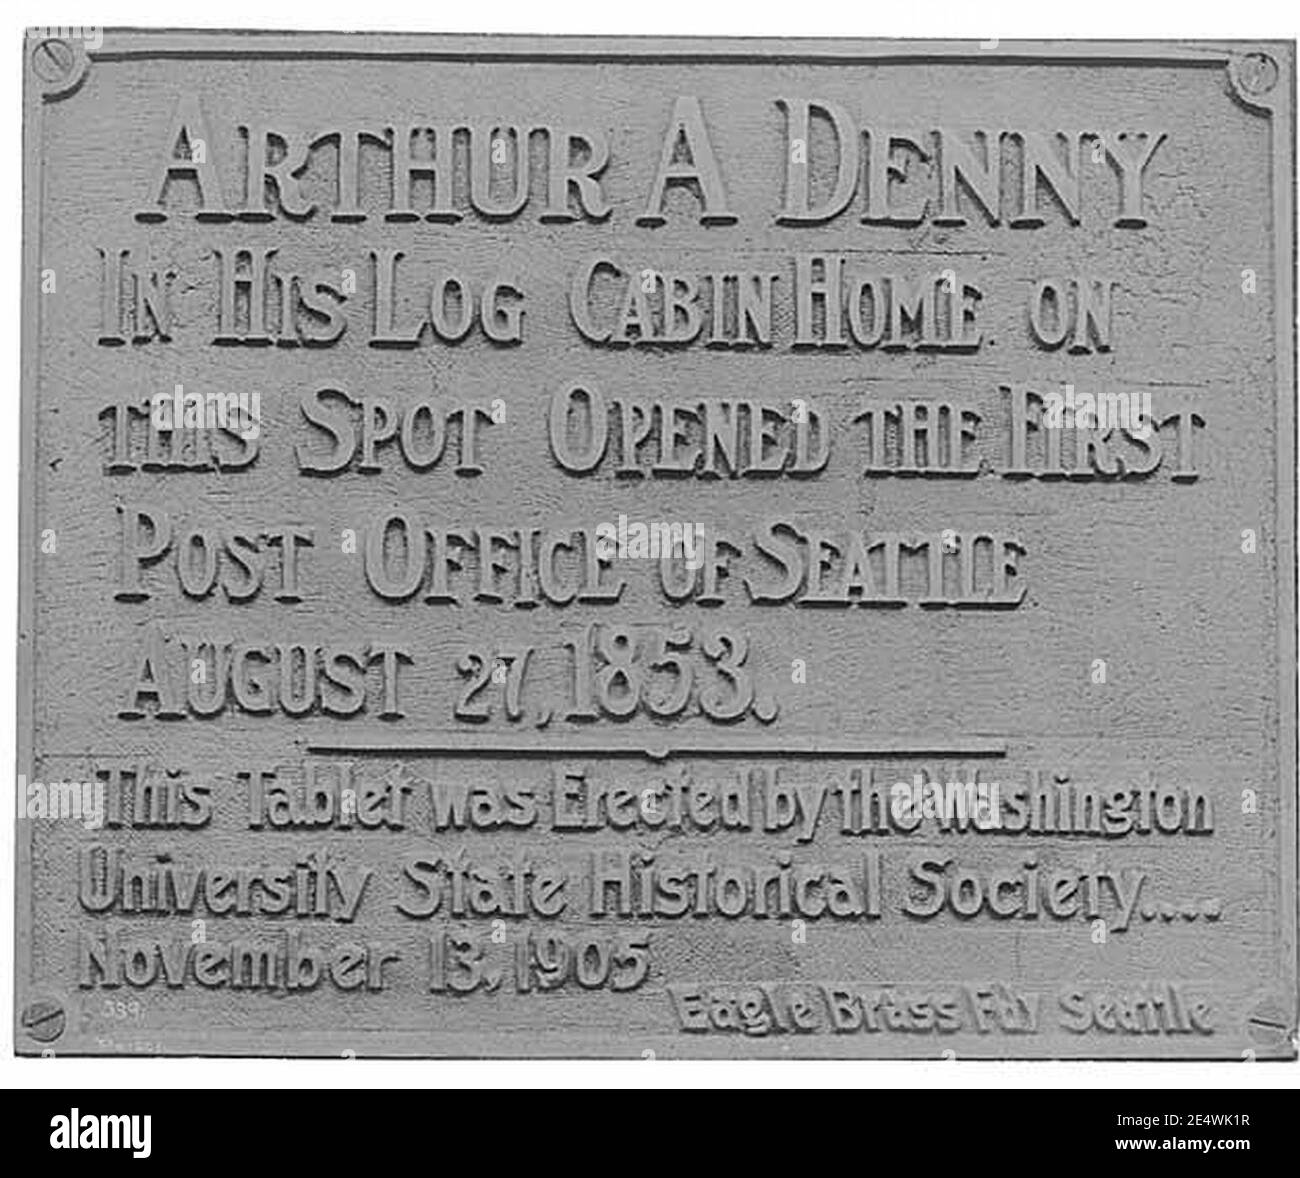 Memorial tablet for Arthur A Denny and first Post Office in Seattle, ca 1905 (PEISER 40). Stock Photo